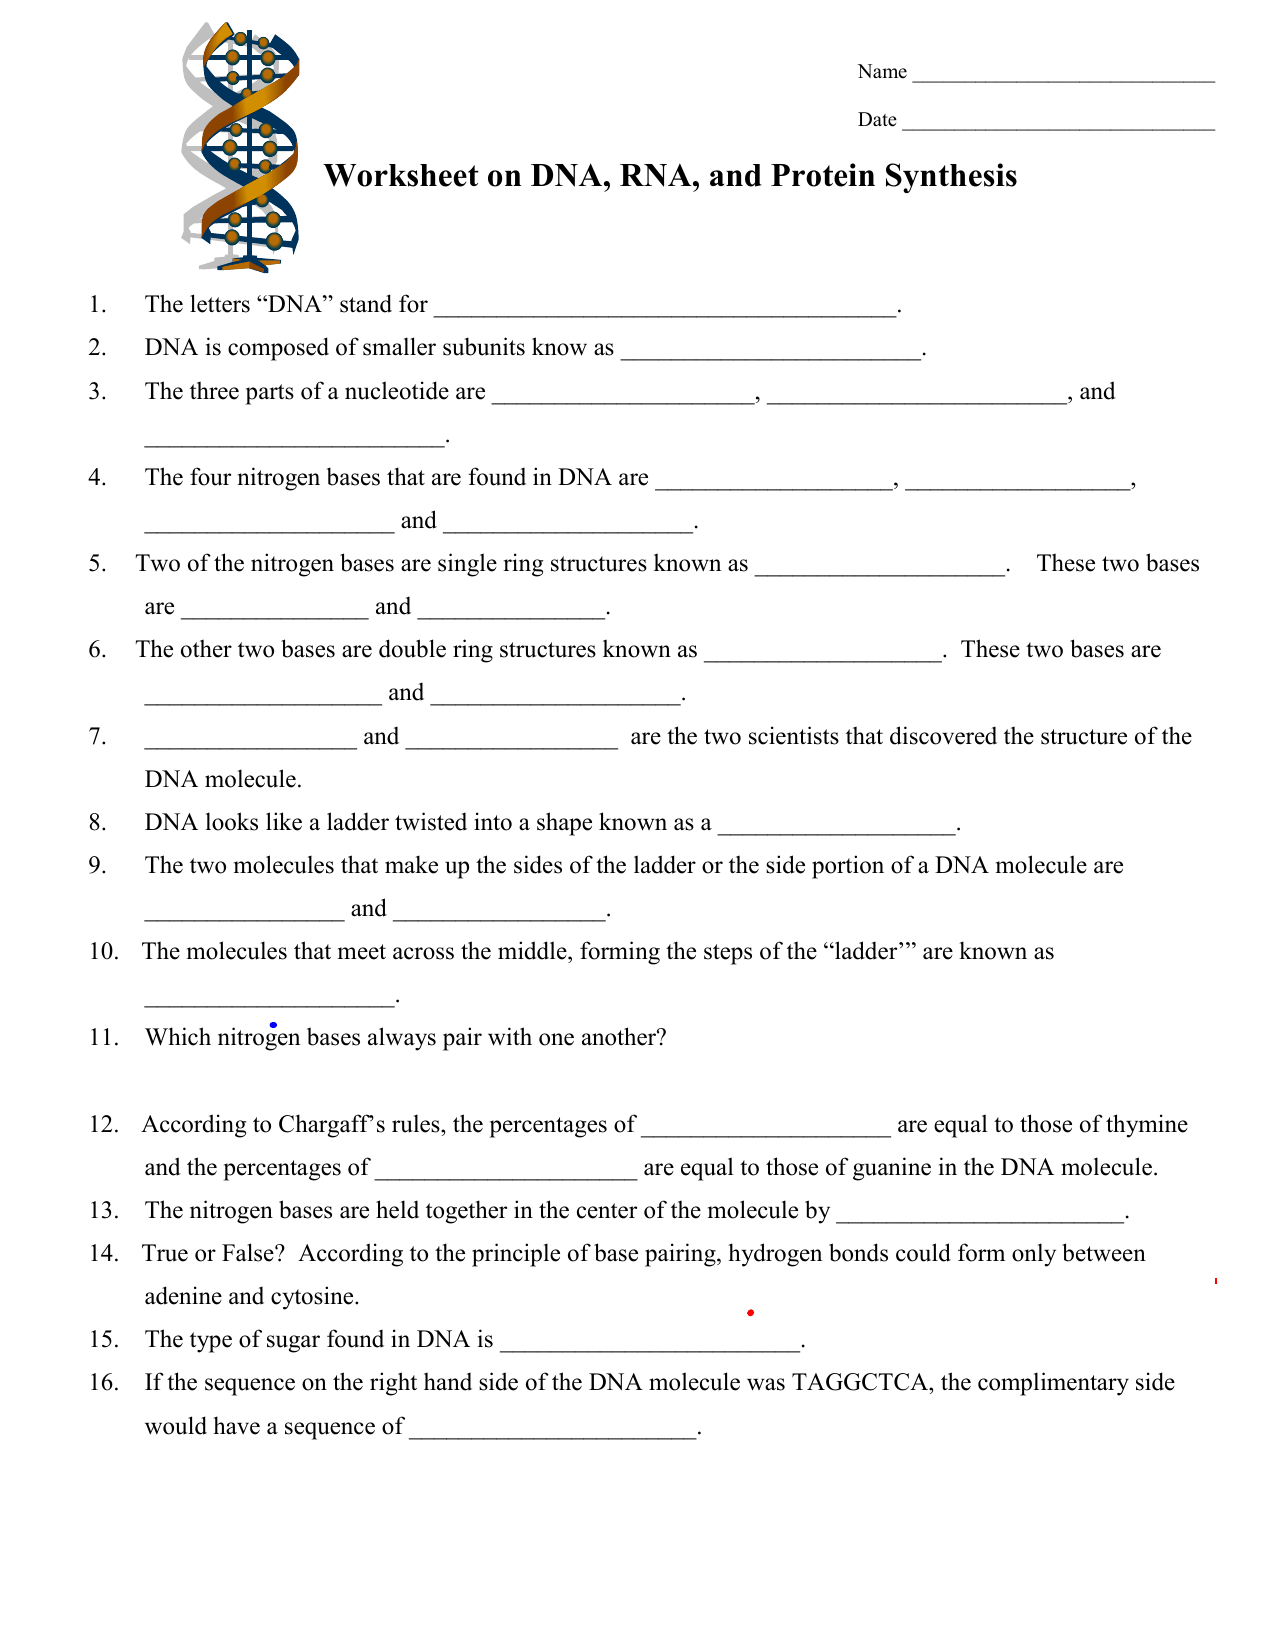 DNA-RNA Worksheet Intended For Protein Synthesis Review Worksheet Answers